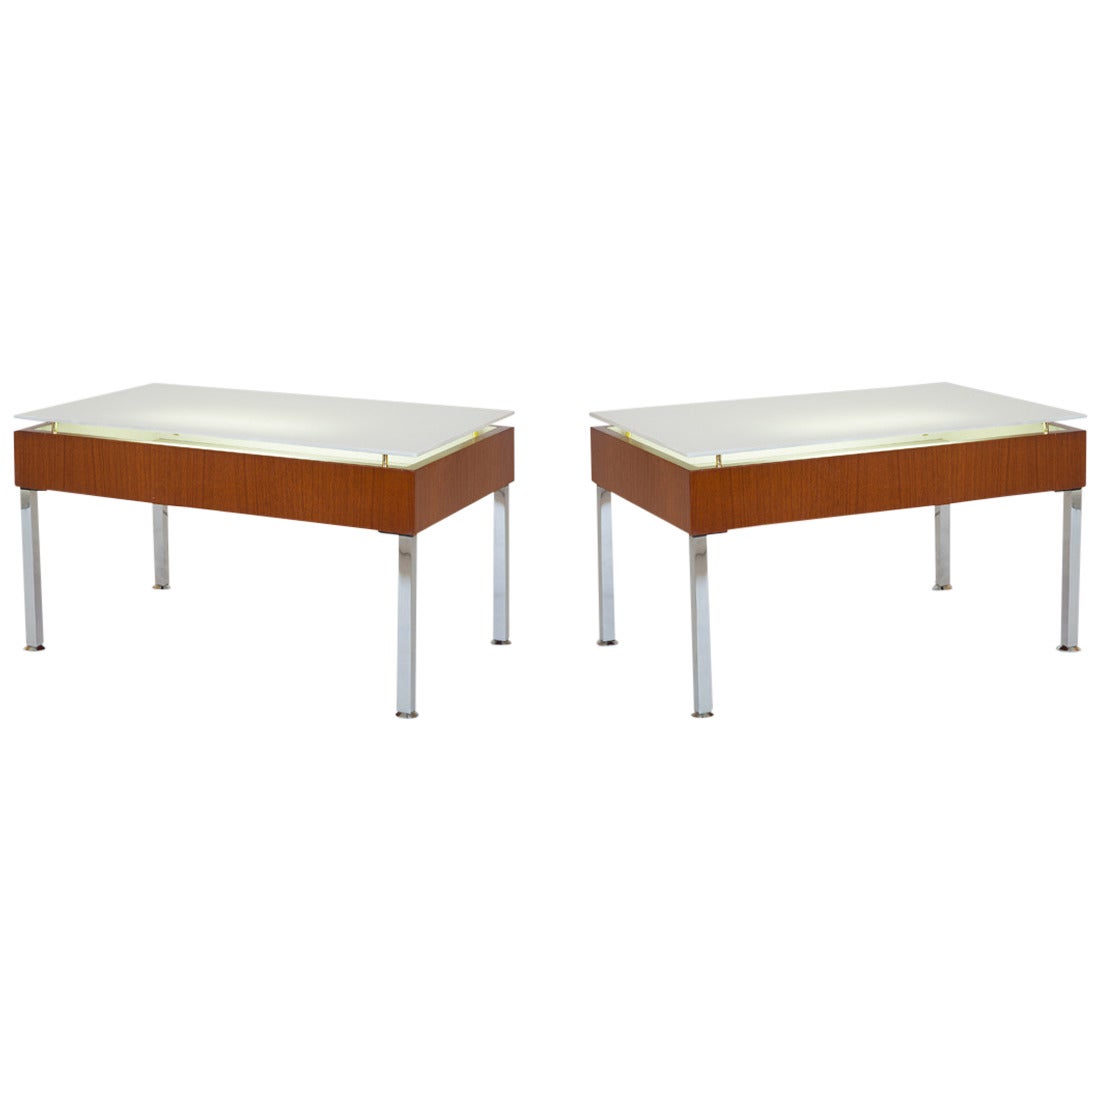 Pair of "G30" Light Tables by Joseph-André Motte, 1958 For Sale